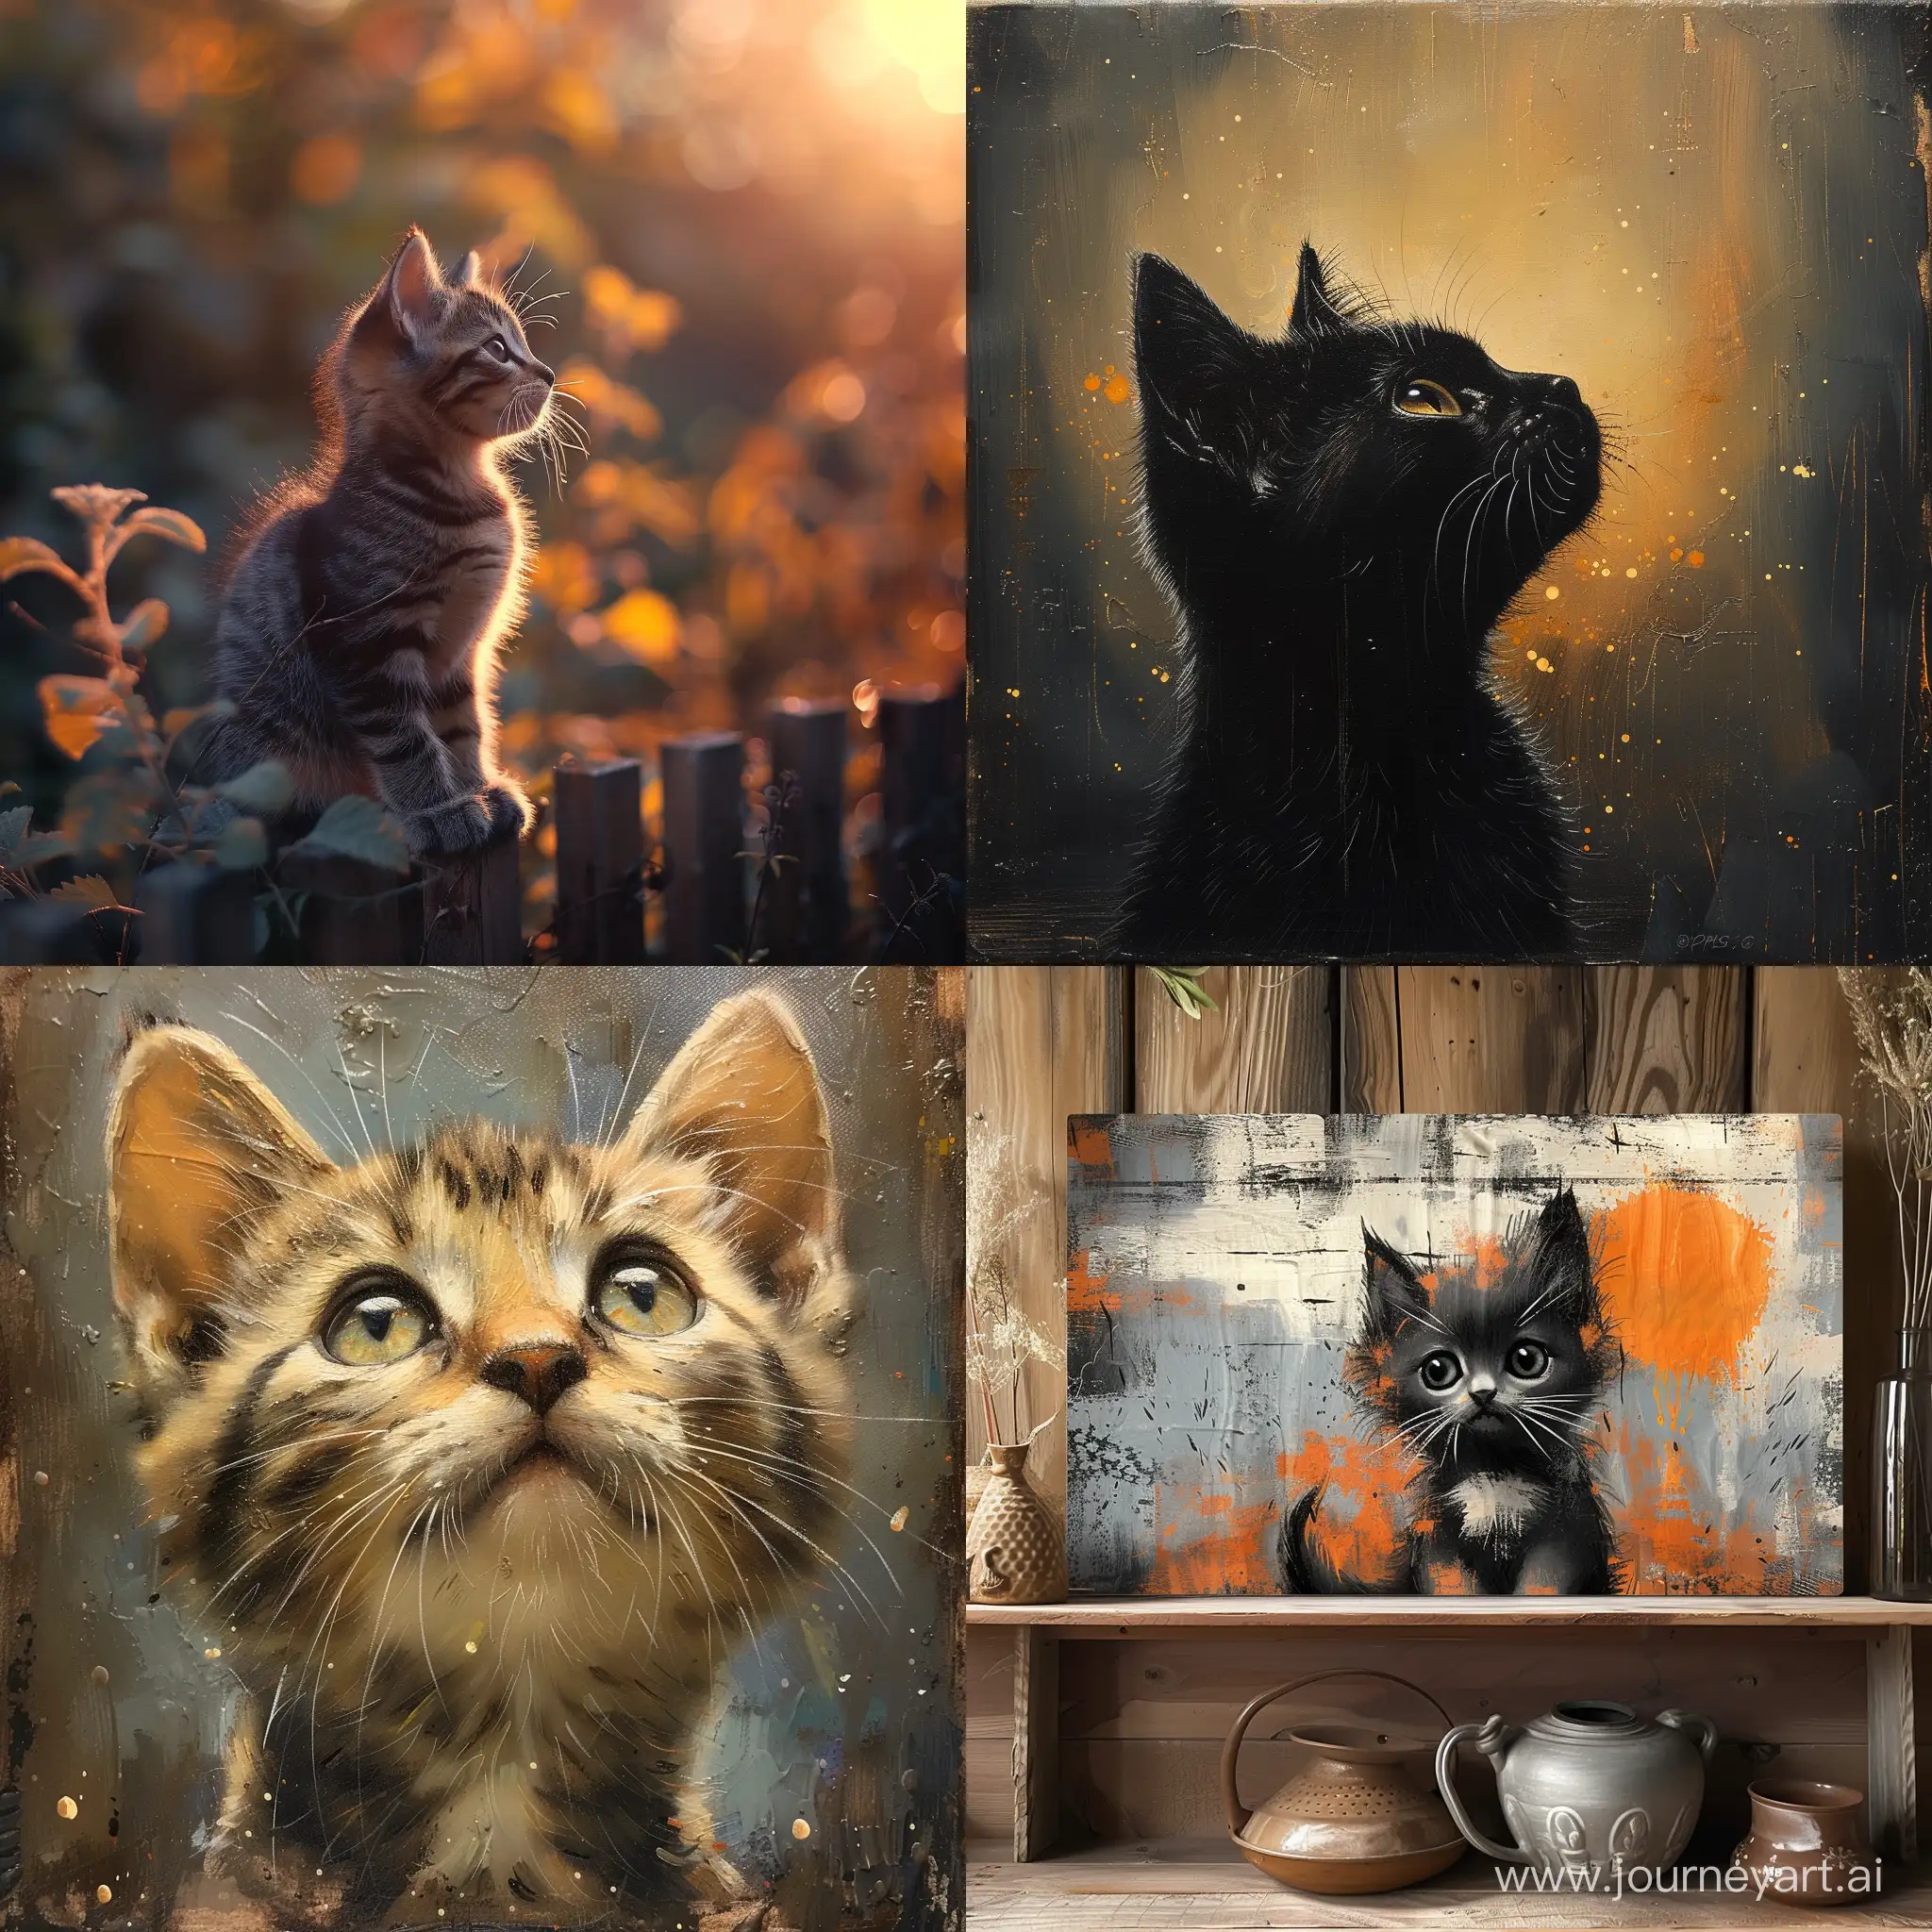 Adorable black kitten with snowy white tips perched on rustic wooden fence ::4 Charming countryside village backdrop ::3 Glowing, warm hues of an orange sunset ::3 Whimsical atmosphere, cozy and serene ::2 Artistically composed, evoking a sense of wonder ::2 --s 250 --v 6 --ar 1:1 --no 87727